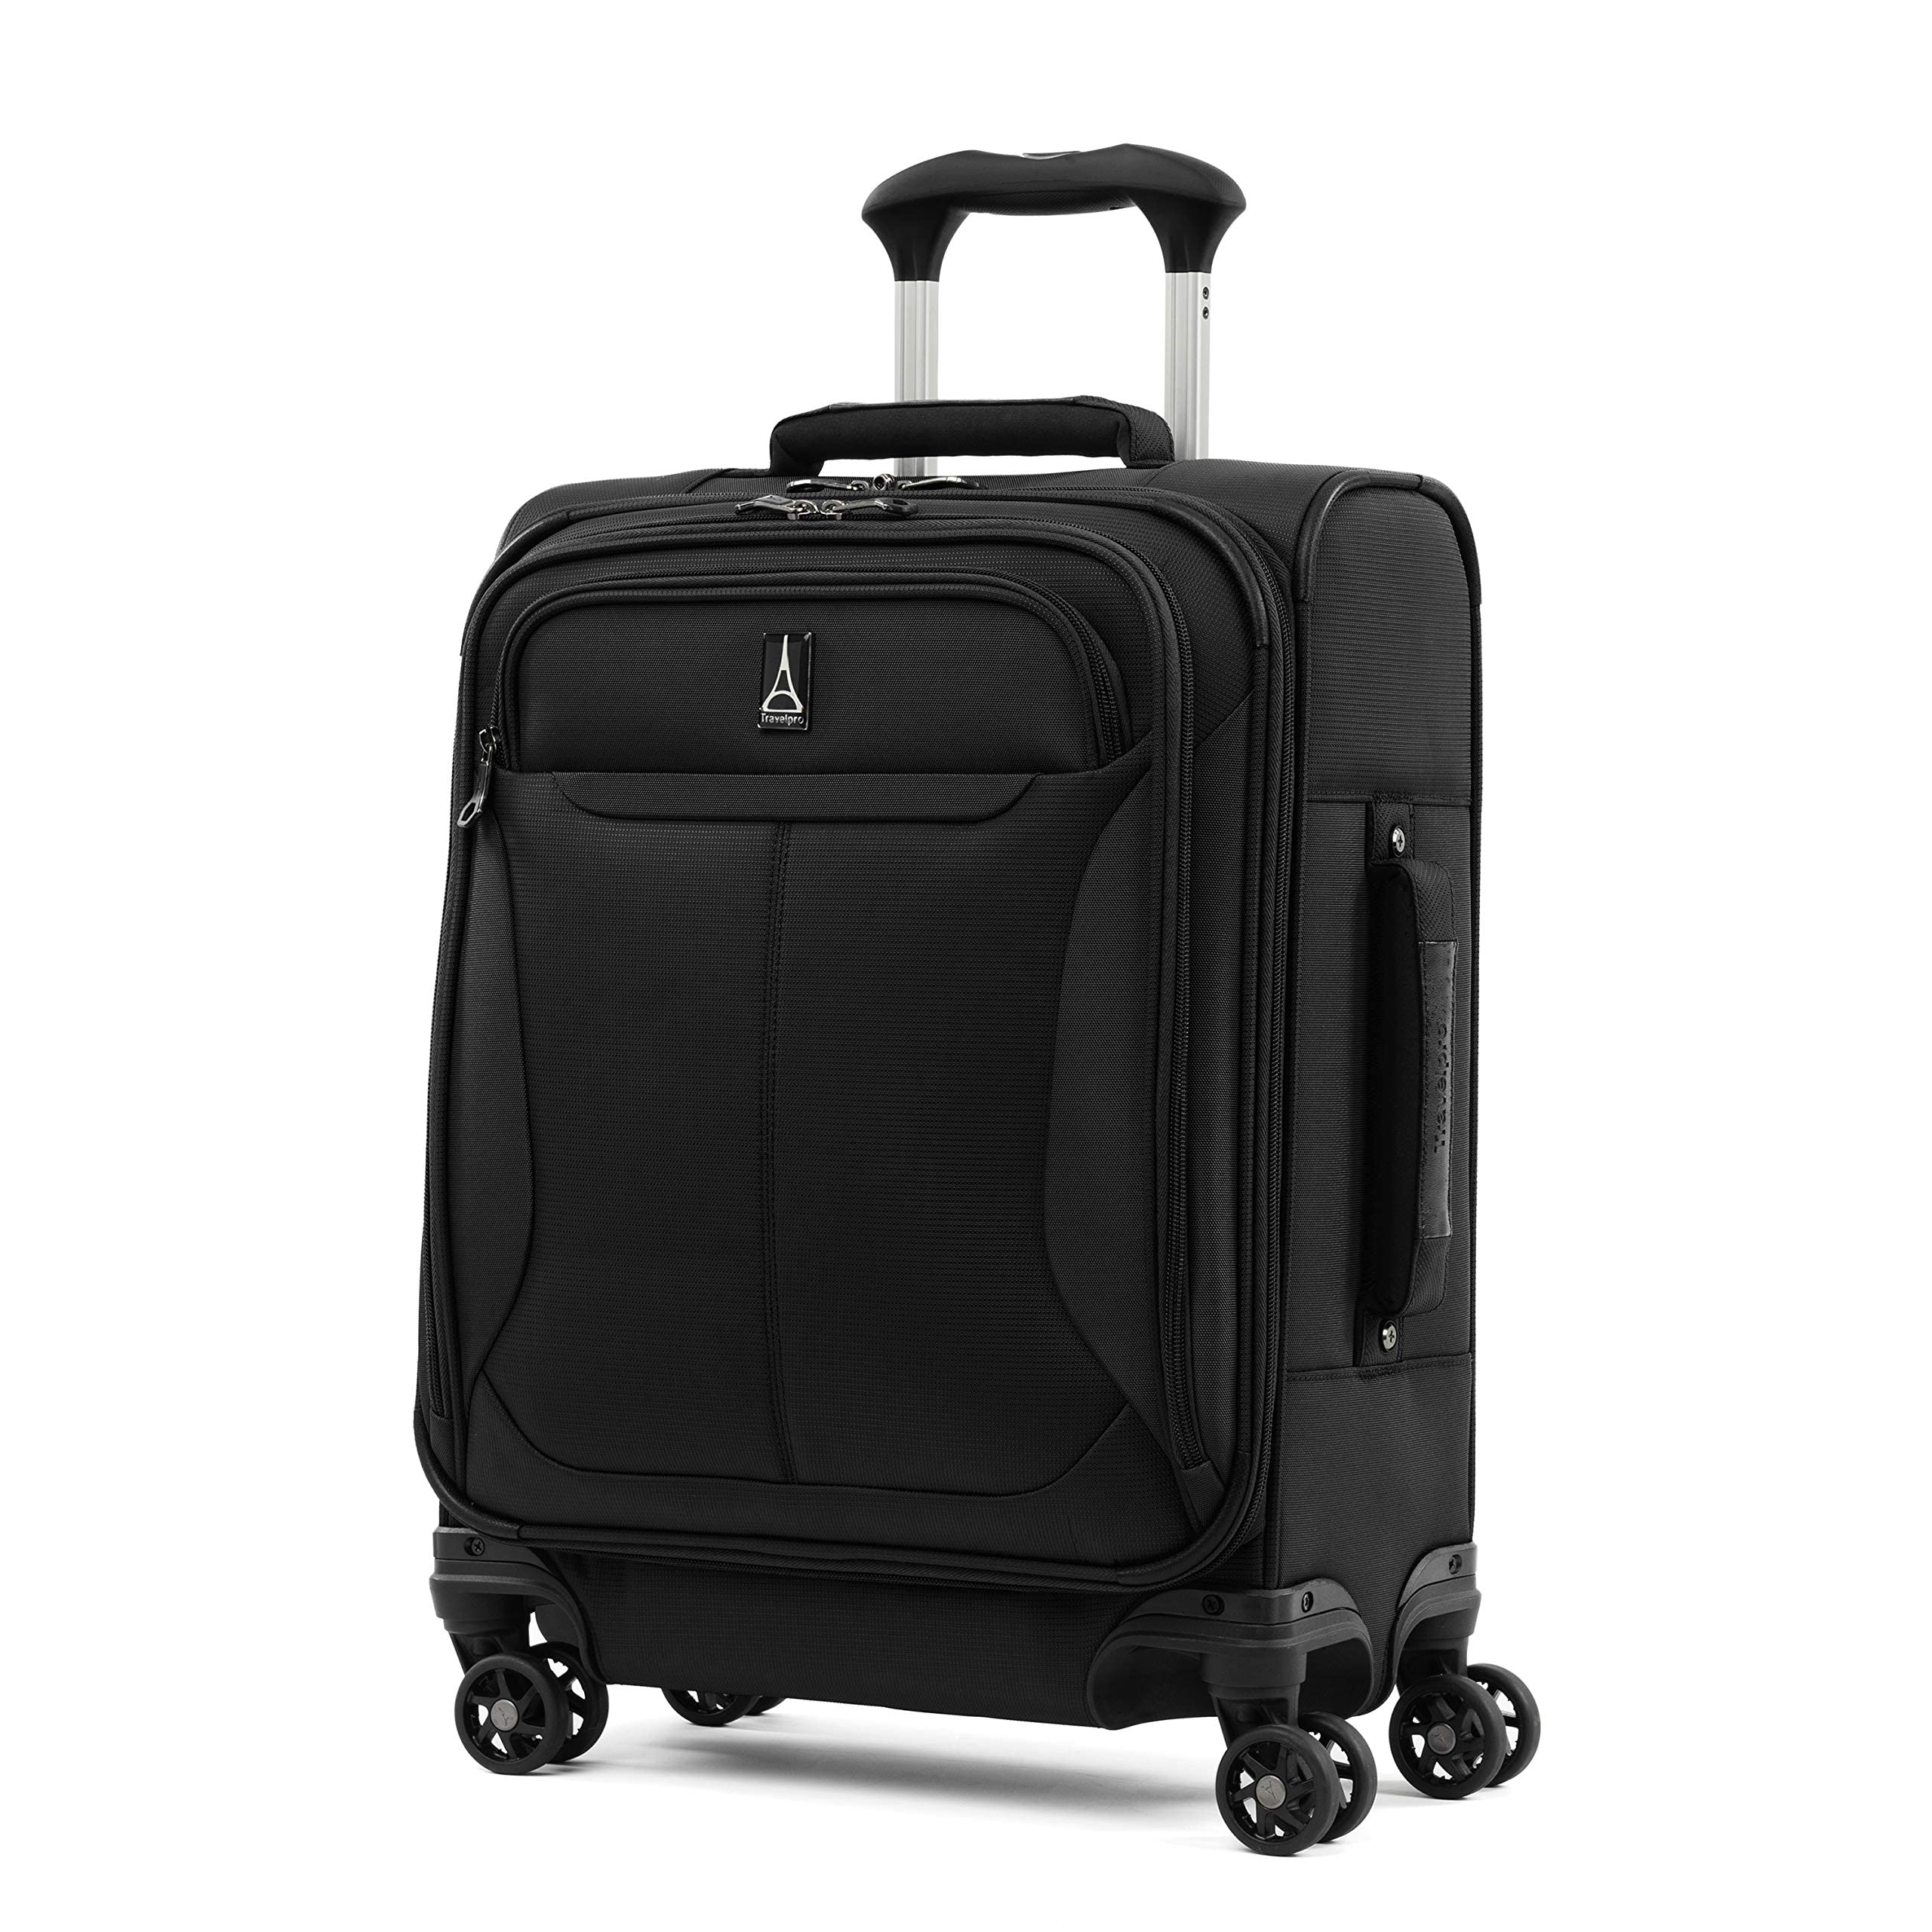 Travelpro Tourlite Softside Expandable Luggage with 4 Spinner Wheels, Lightweight Suitcase, Men and Women, Black, Carry-On 19-Inch